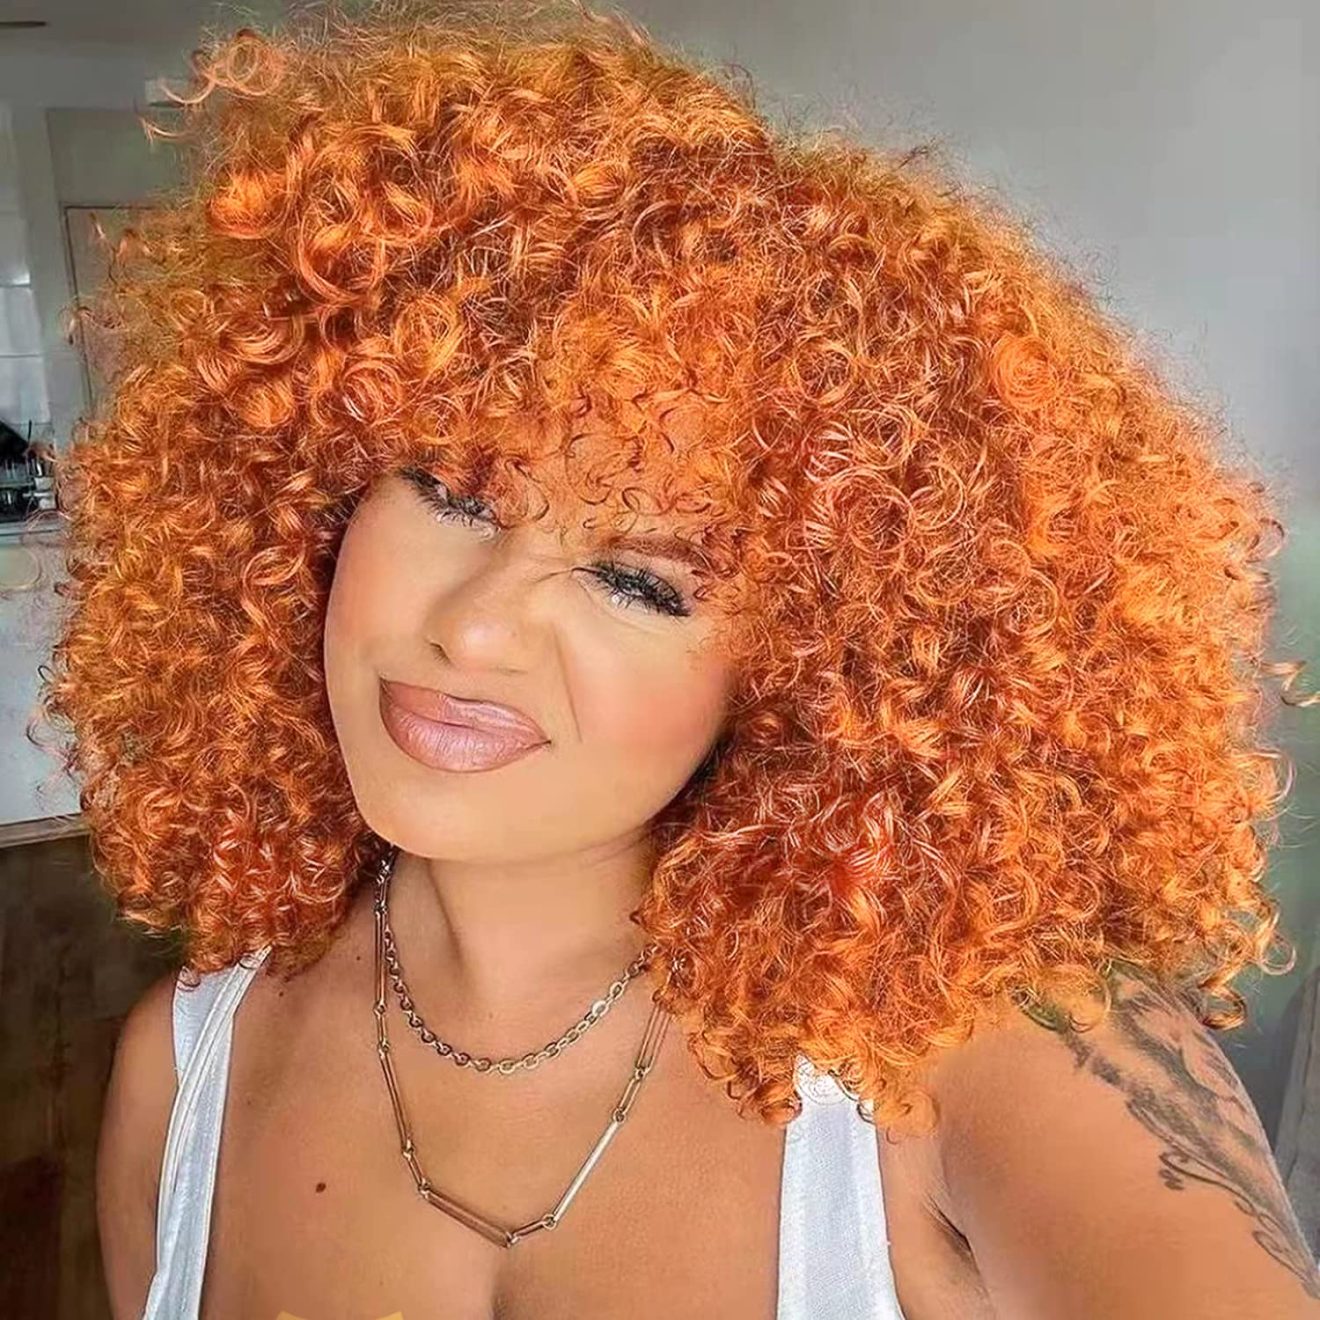 Afro Wig Women’s Curly Ginger Red Wigs For Women Natural Synthetic Hair Kinky Curly Wig With